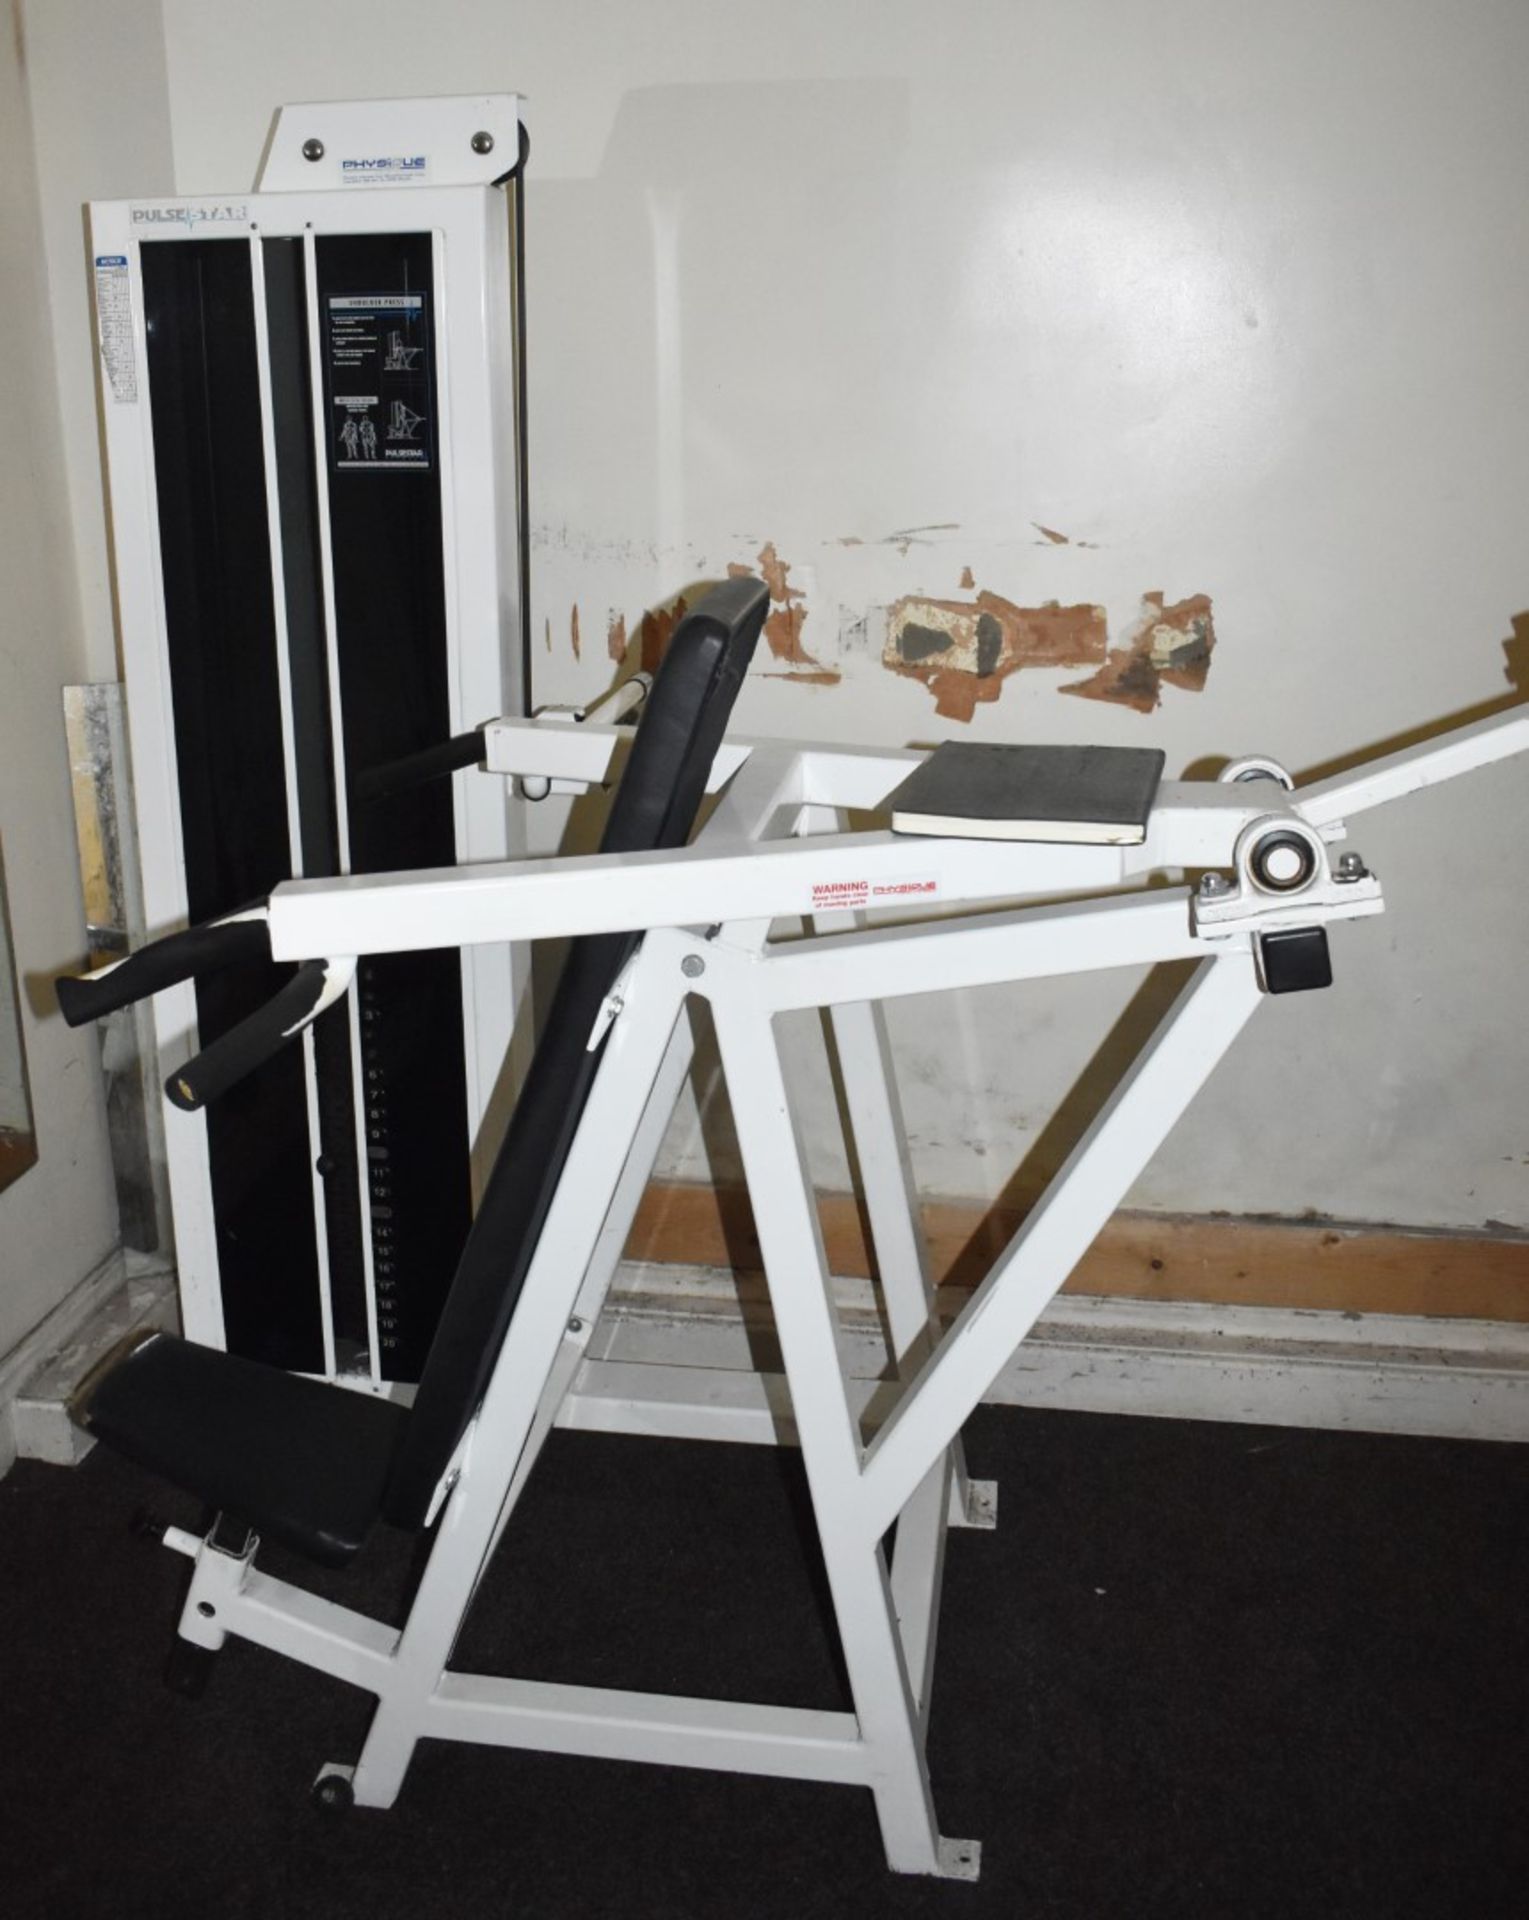 Contents of Bodybuilding and Strongman Gym - Includes Approx 30 Pieces of Gym Equipment, Floor Mats, - Image 31 of 31